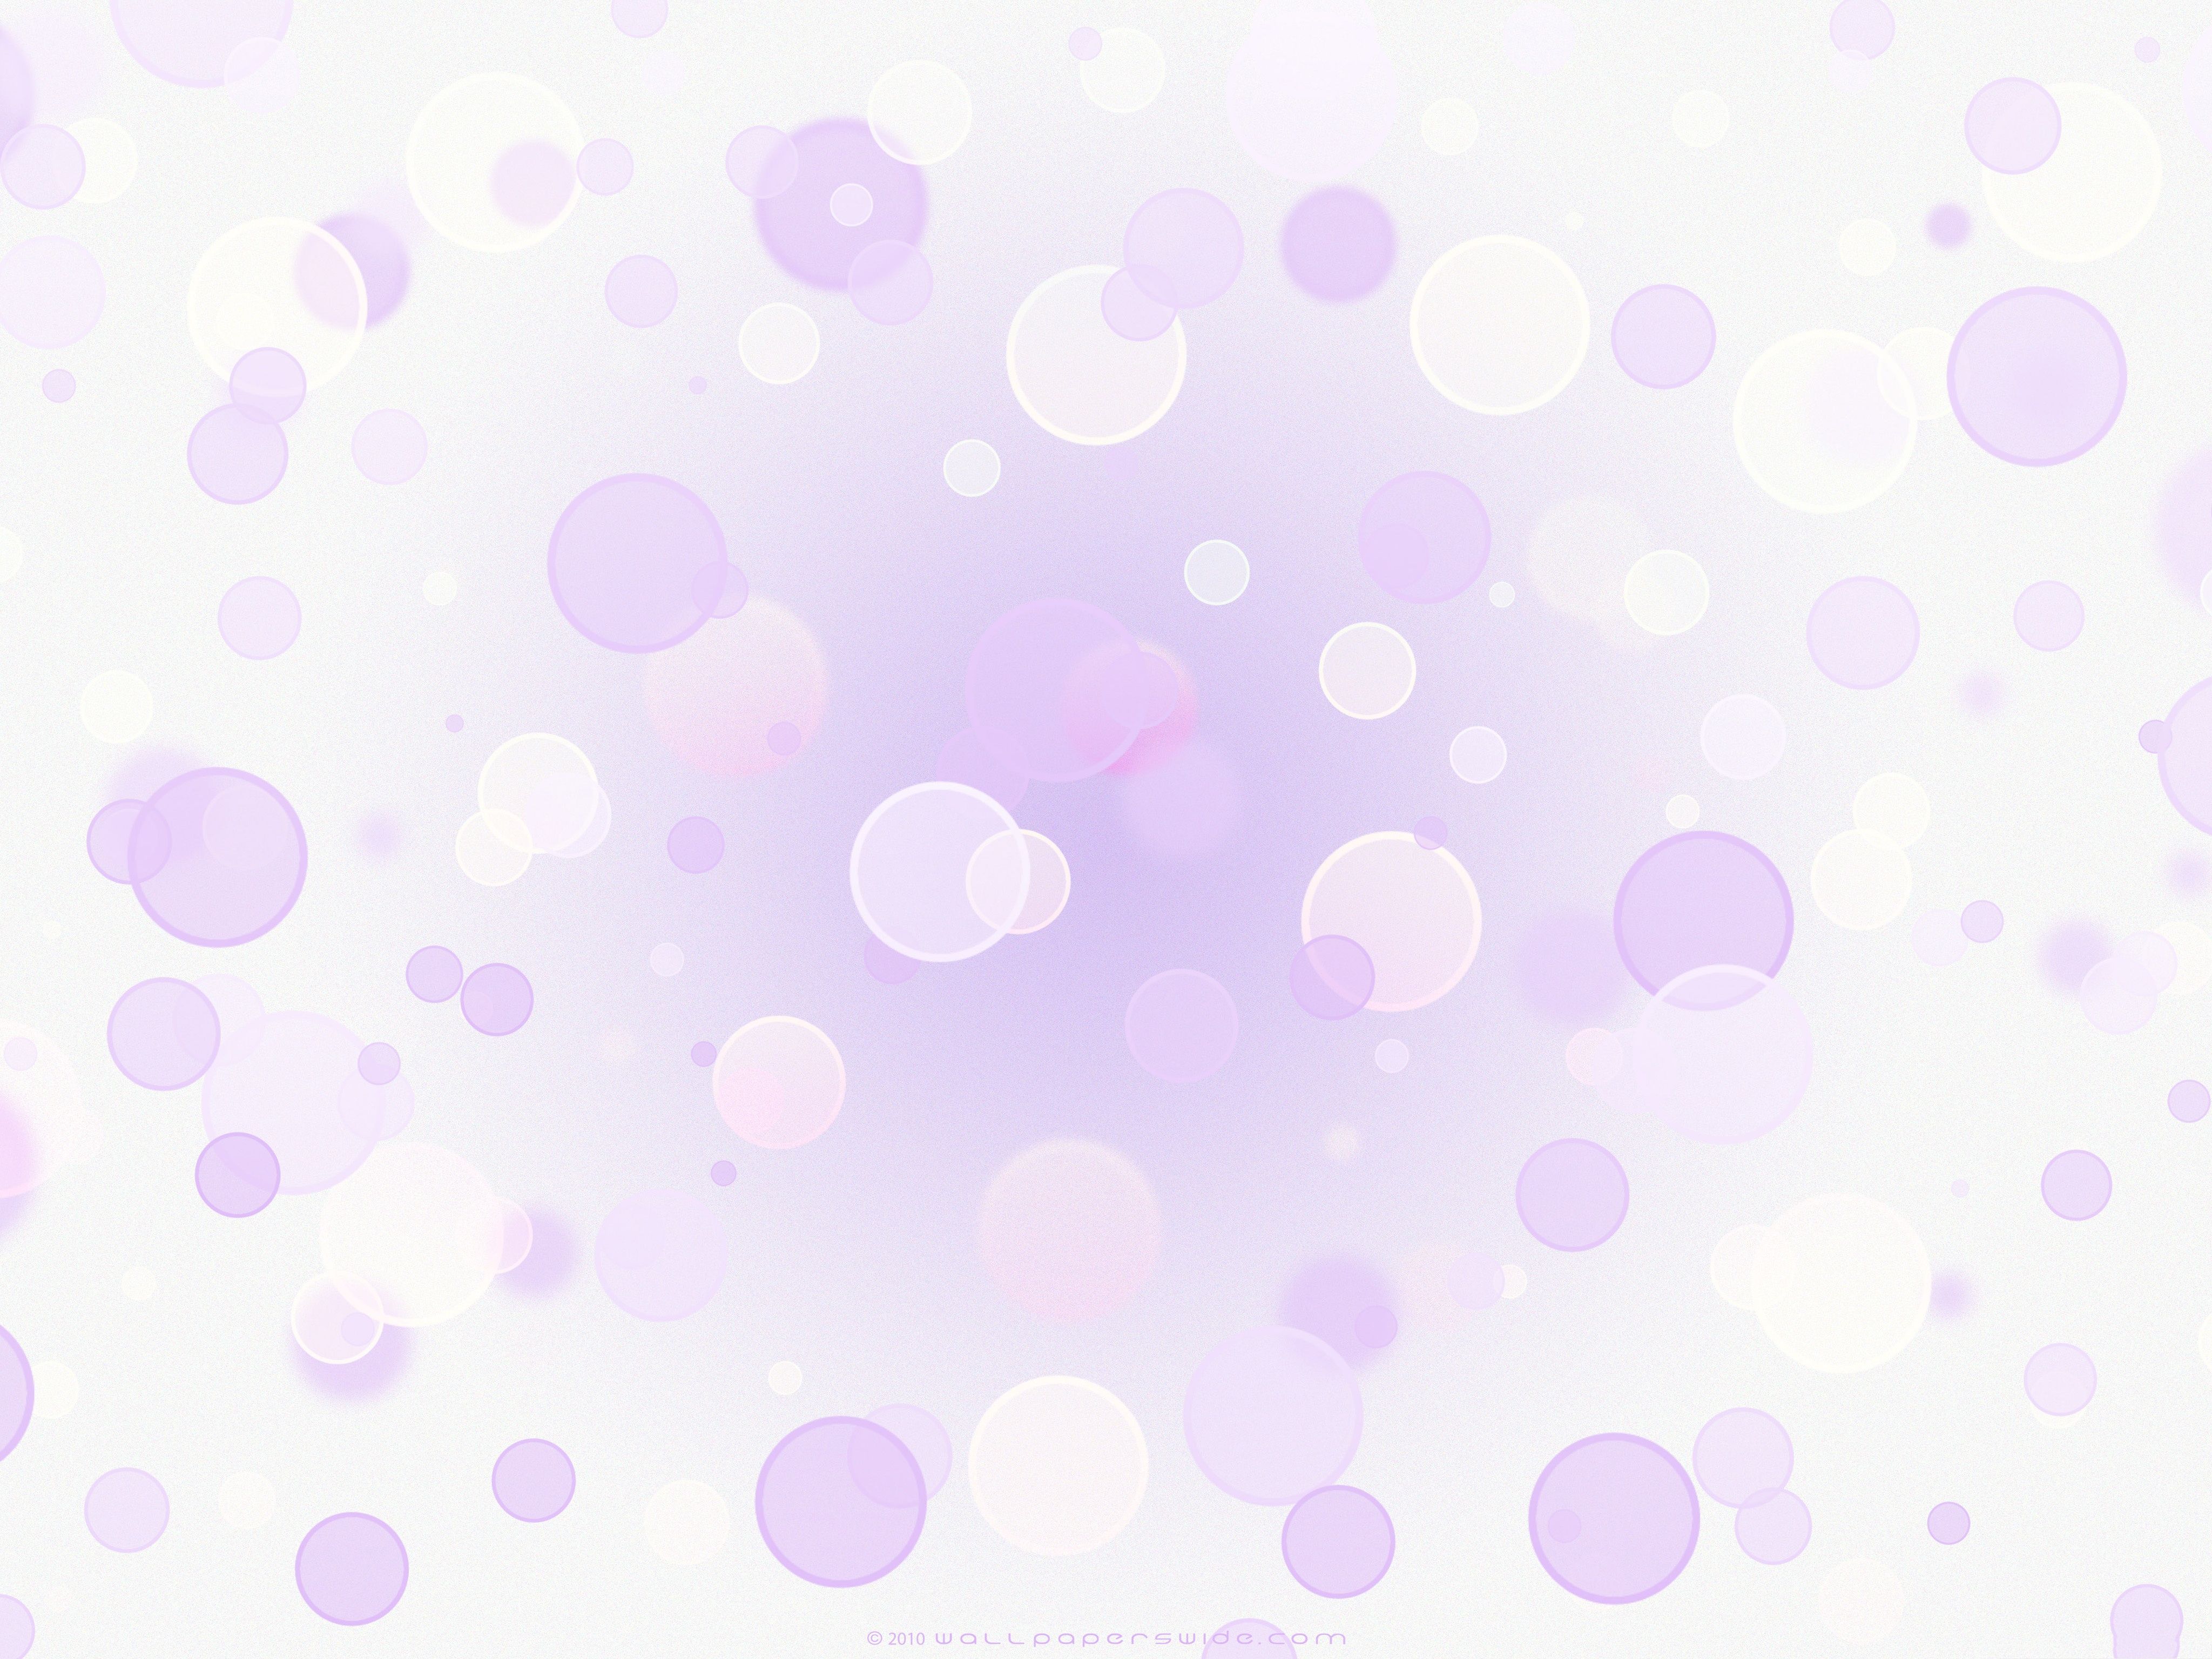 Free download High Quality Wide Wallpaper Purple Circles on White [4096x3072] for your Desktop, Mobile & Tablet. Explore Purple And White Background. Purple Wallcoverings Wallpaper